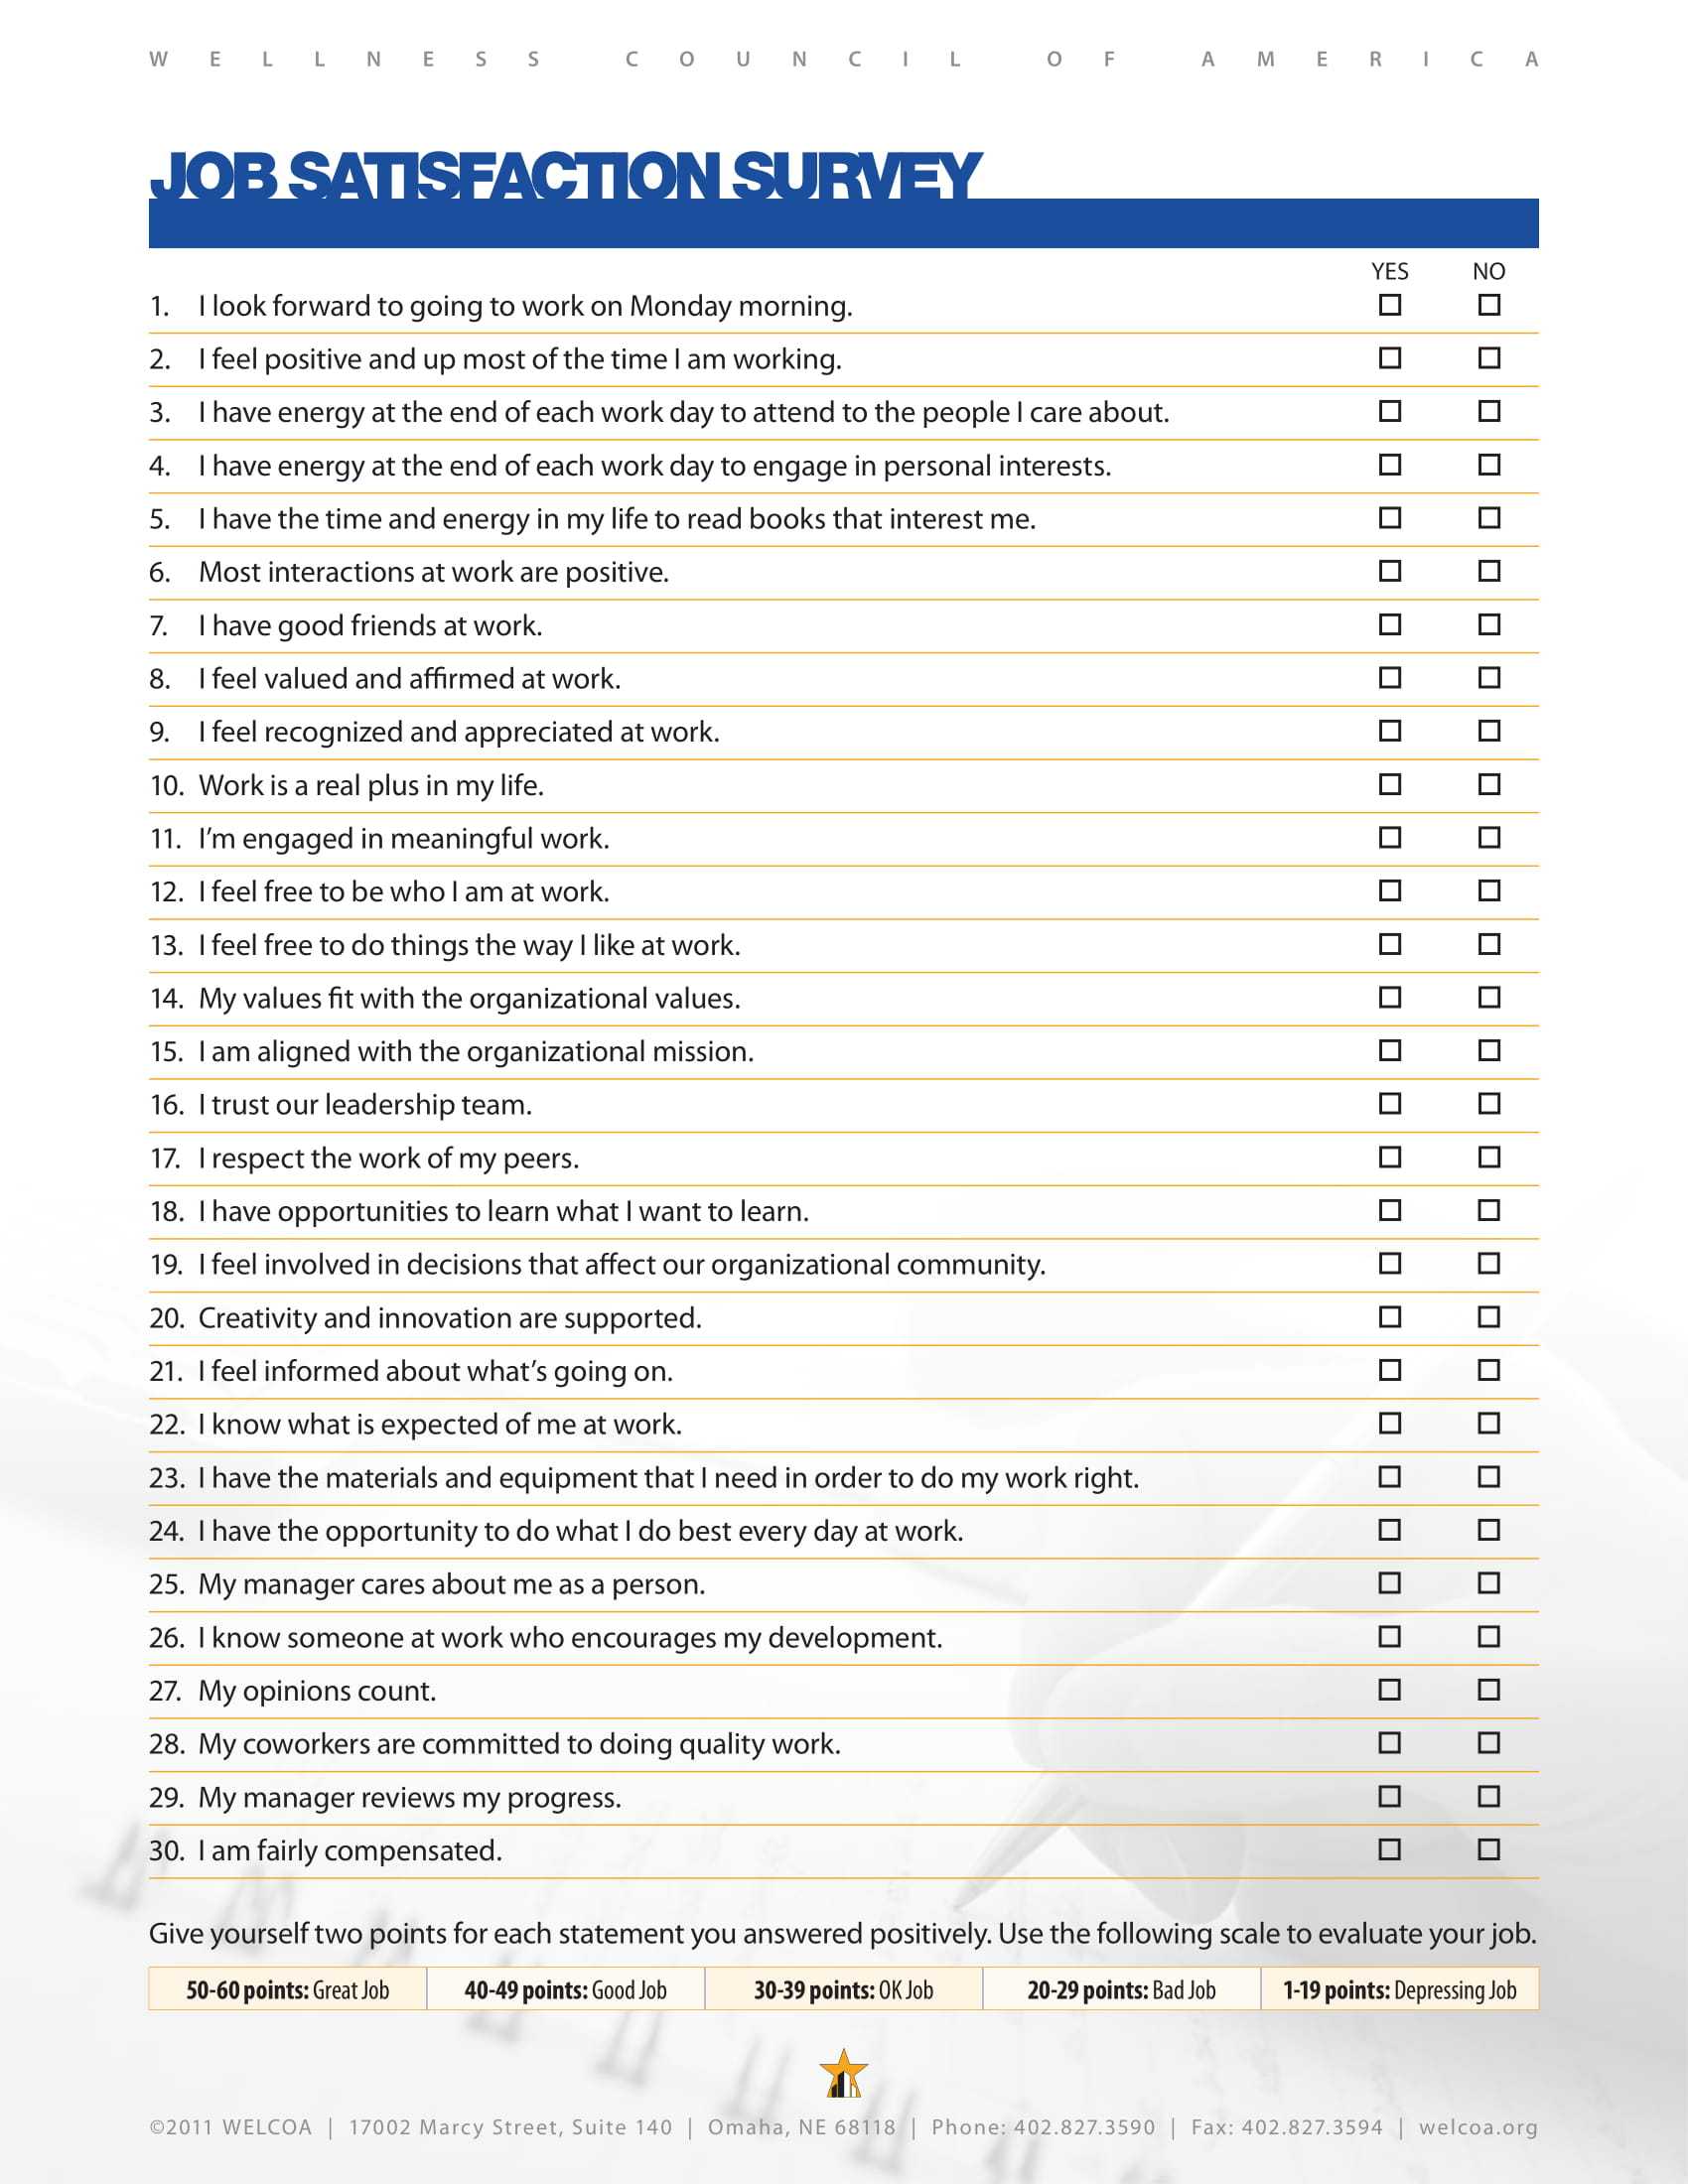 14+ Employee Satisfaction Survey Form Examples – Pdf, Doc With Regard To Employee Satisfaction Survey Template Word